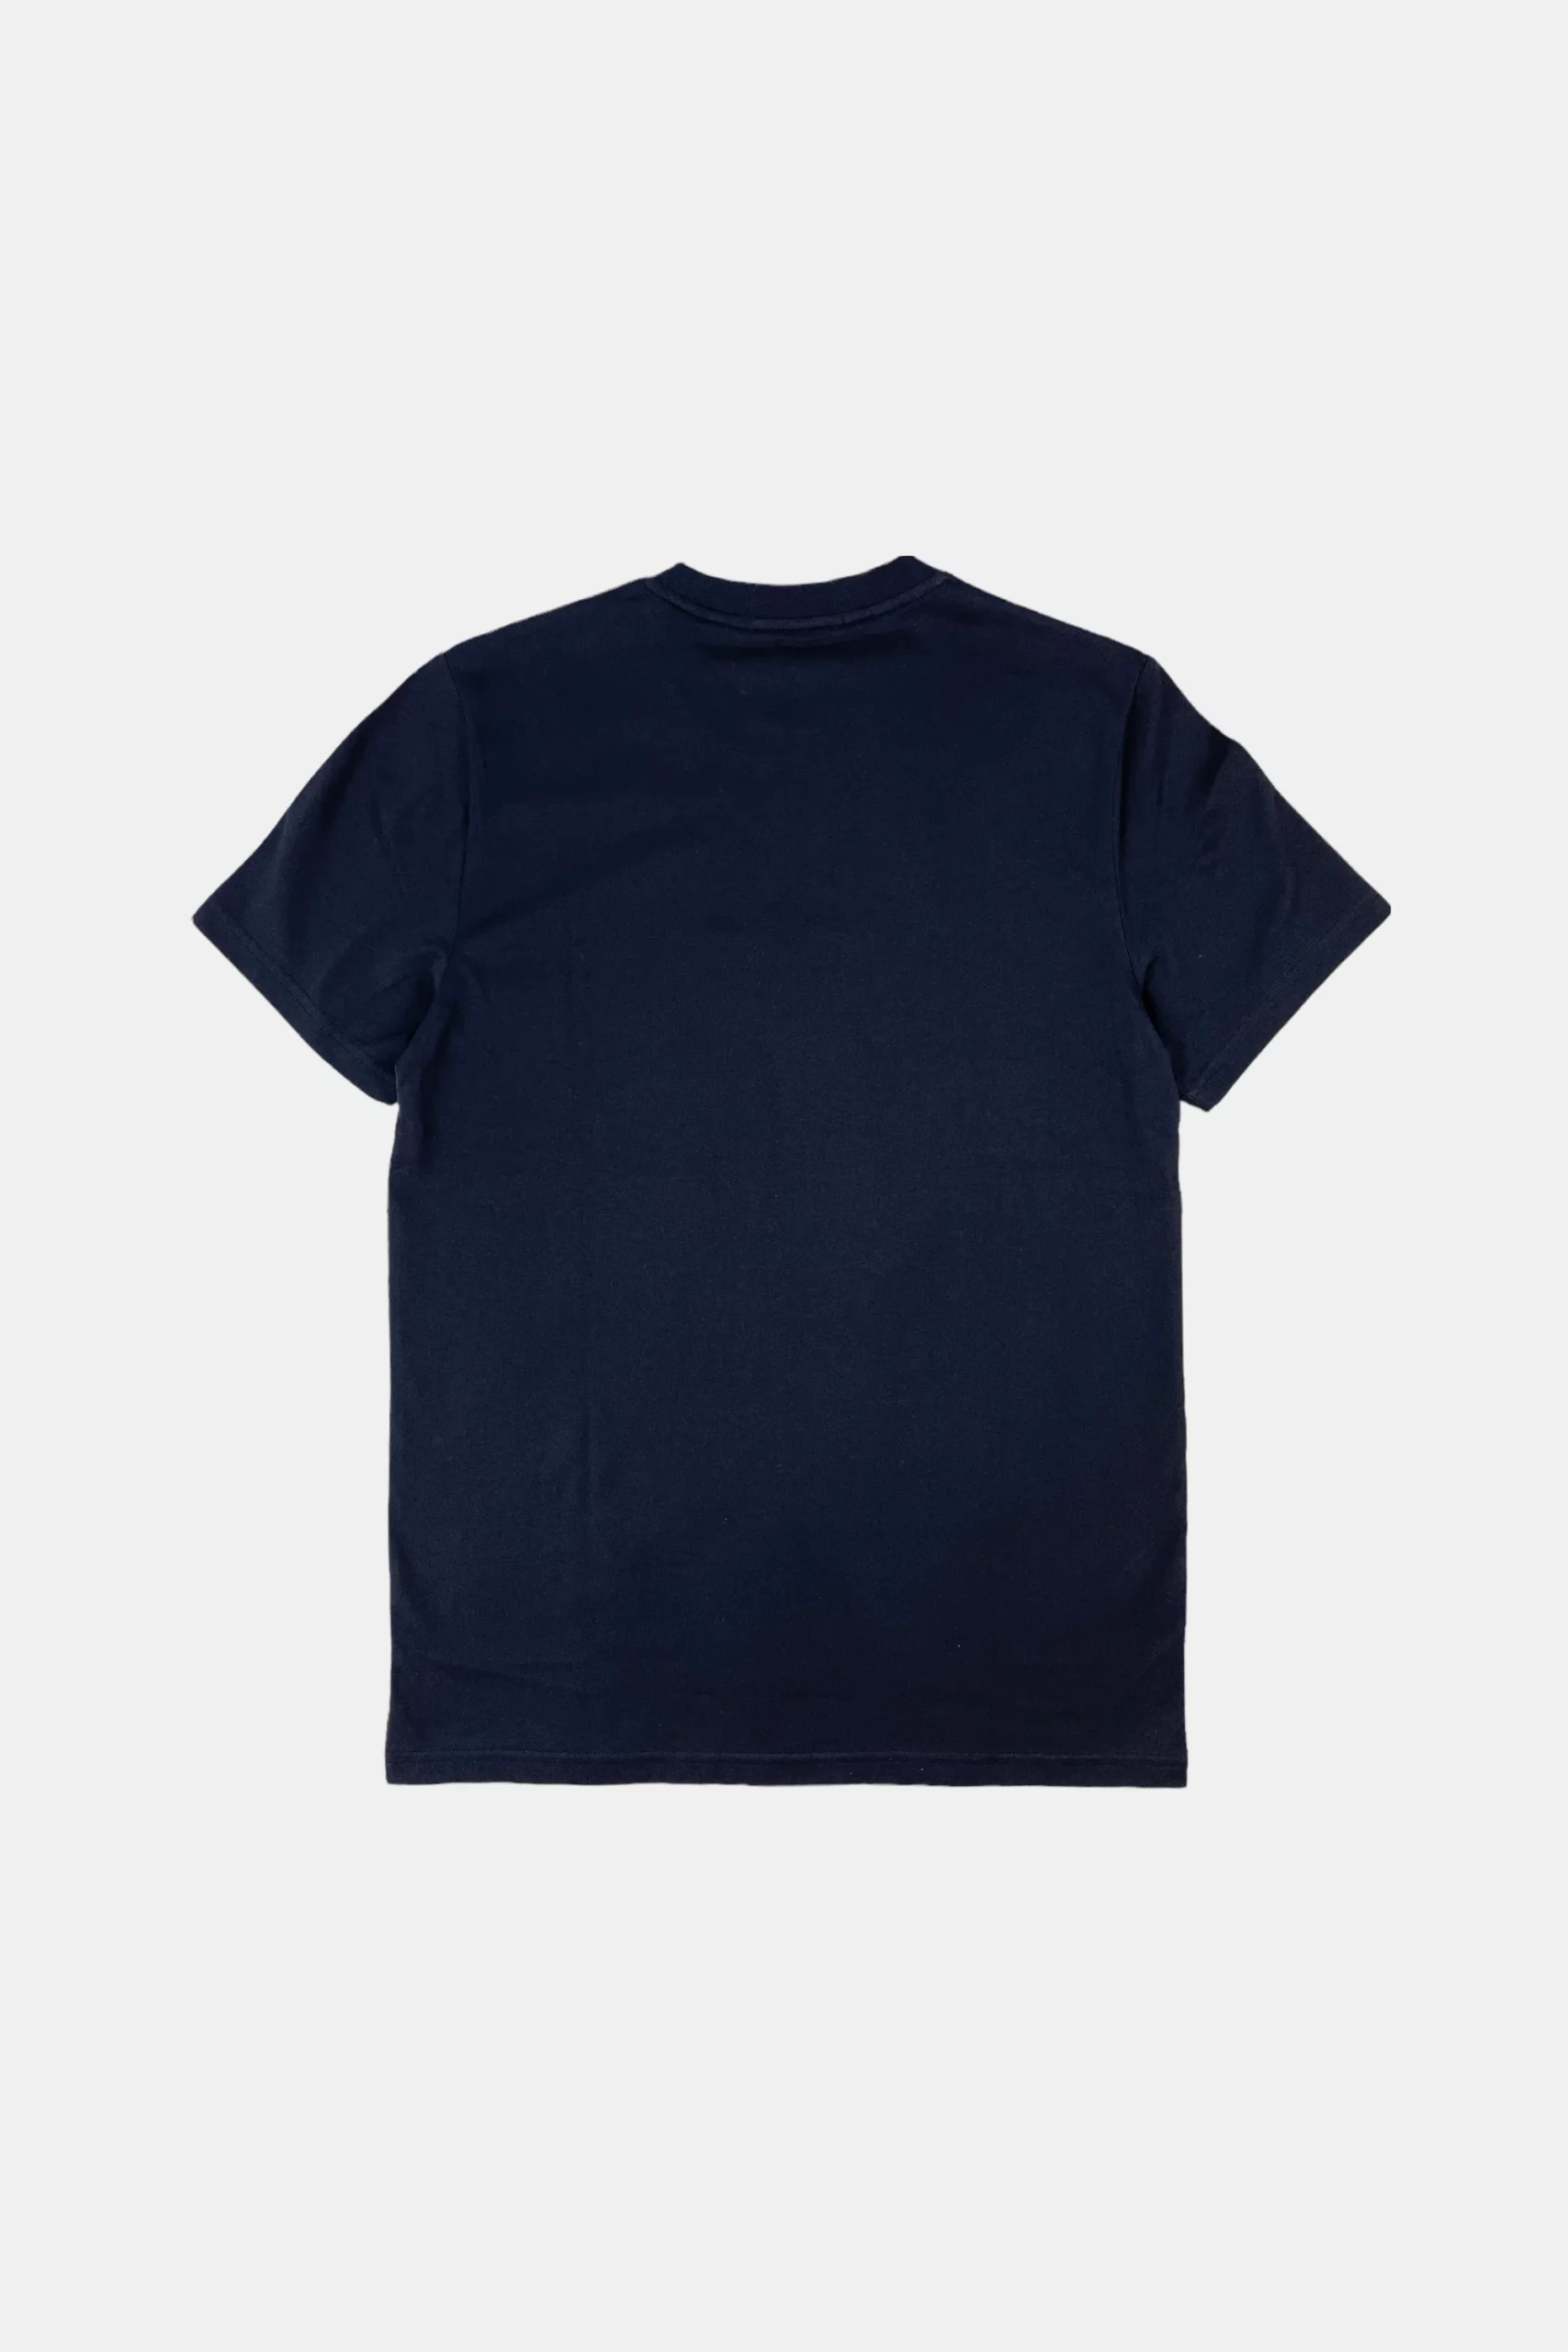 futbolka fred perry embroidered navy 2